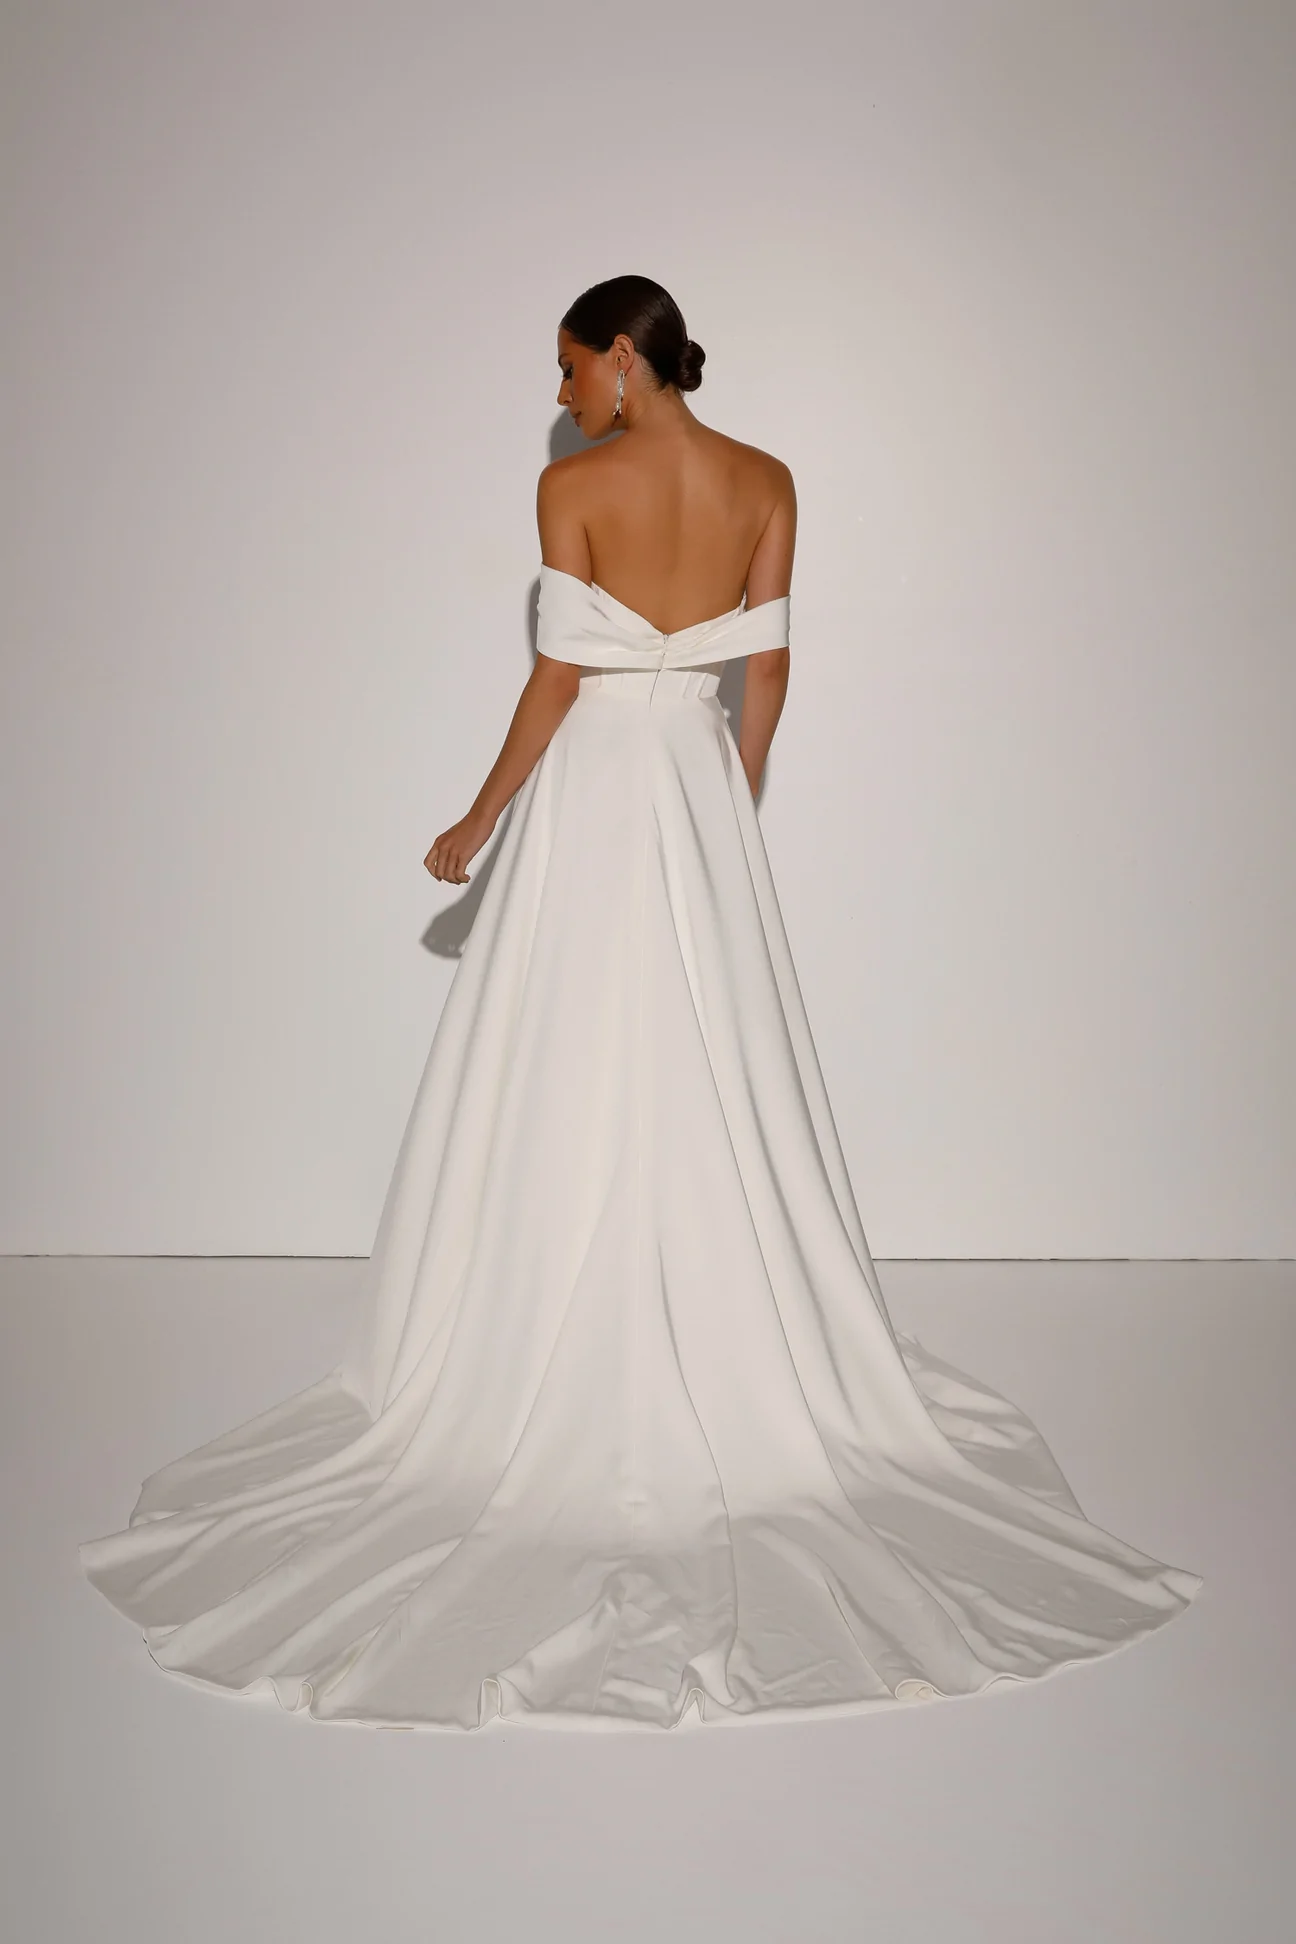 Evie Young Penn wedding gown - back